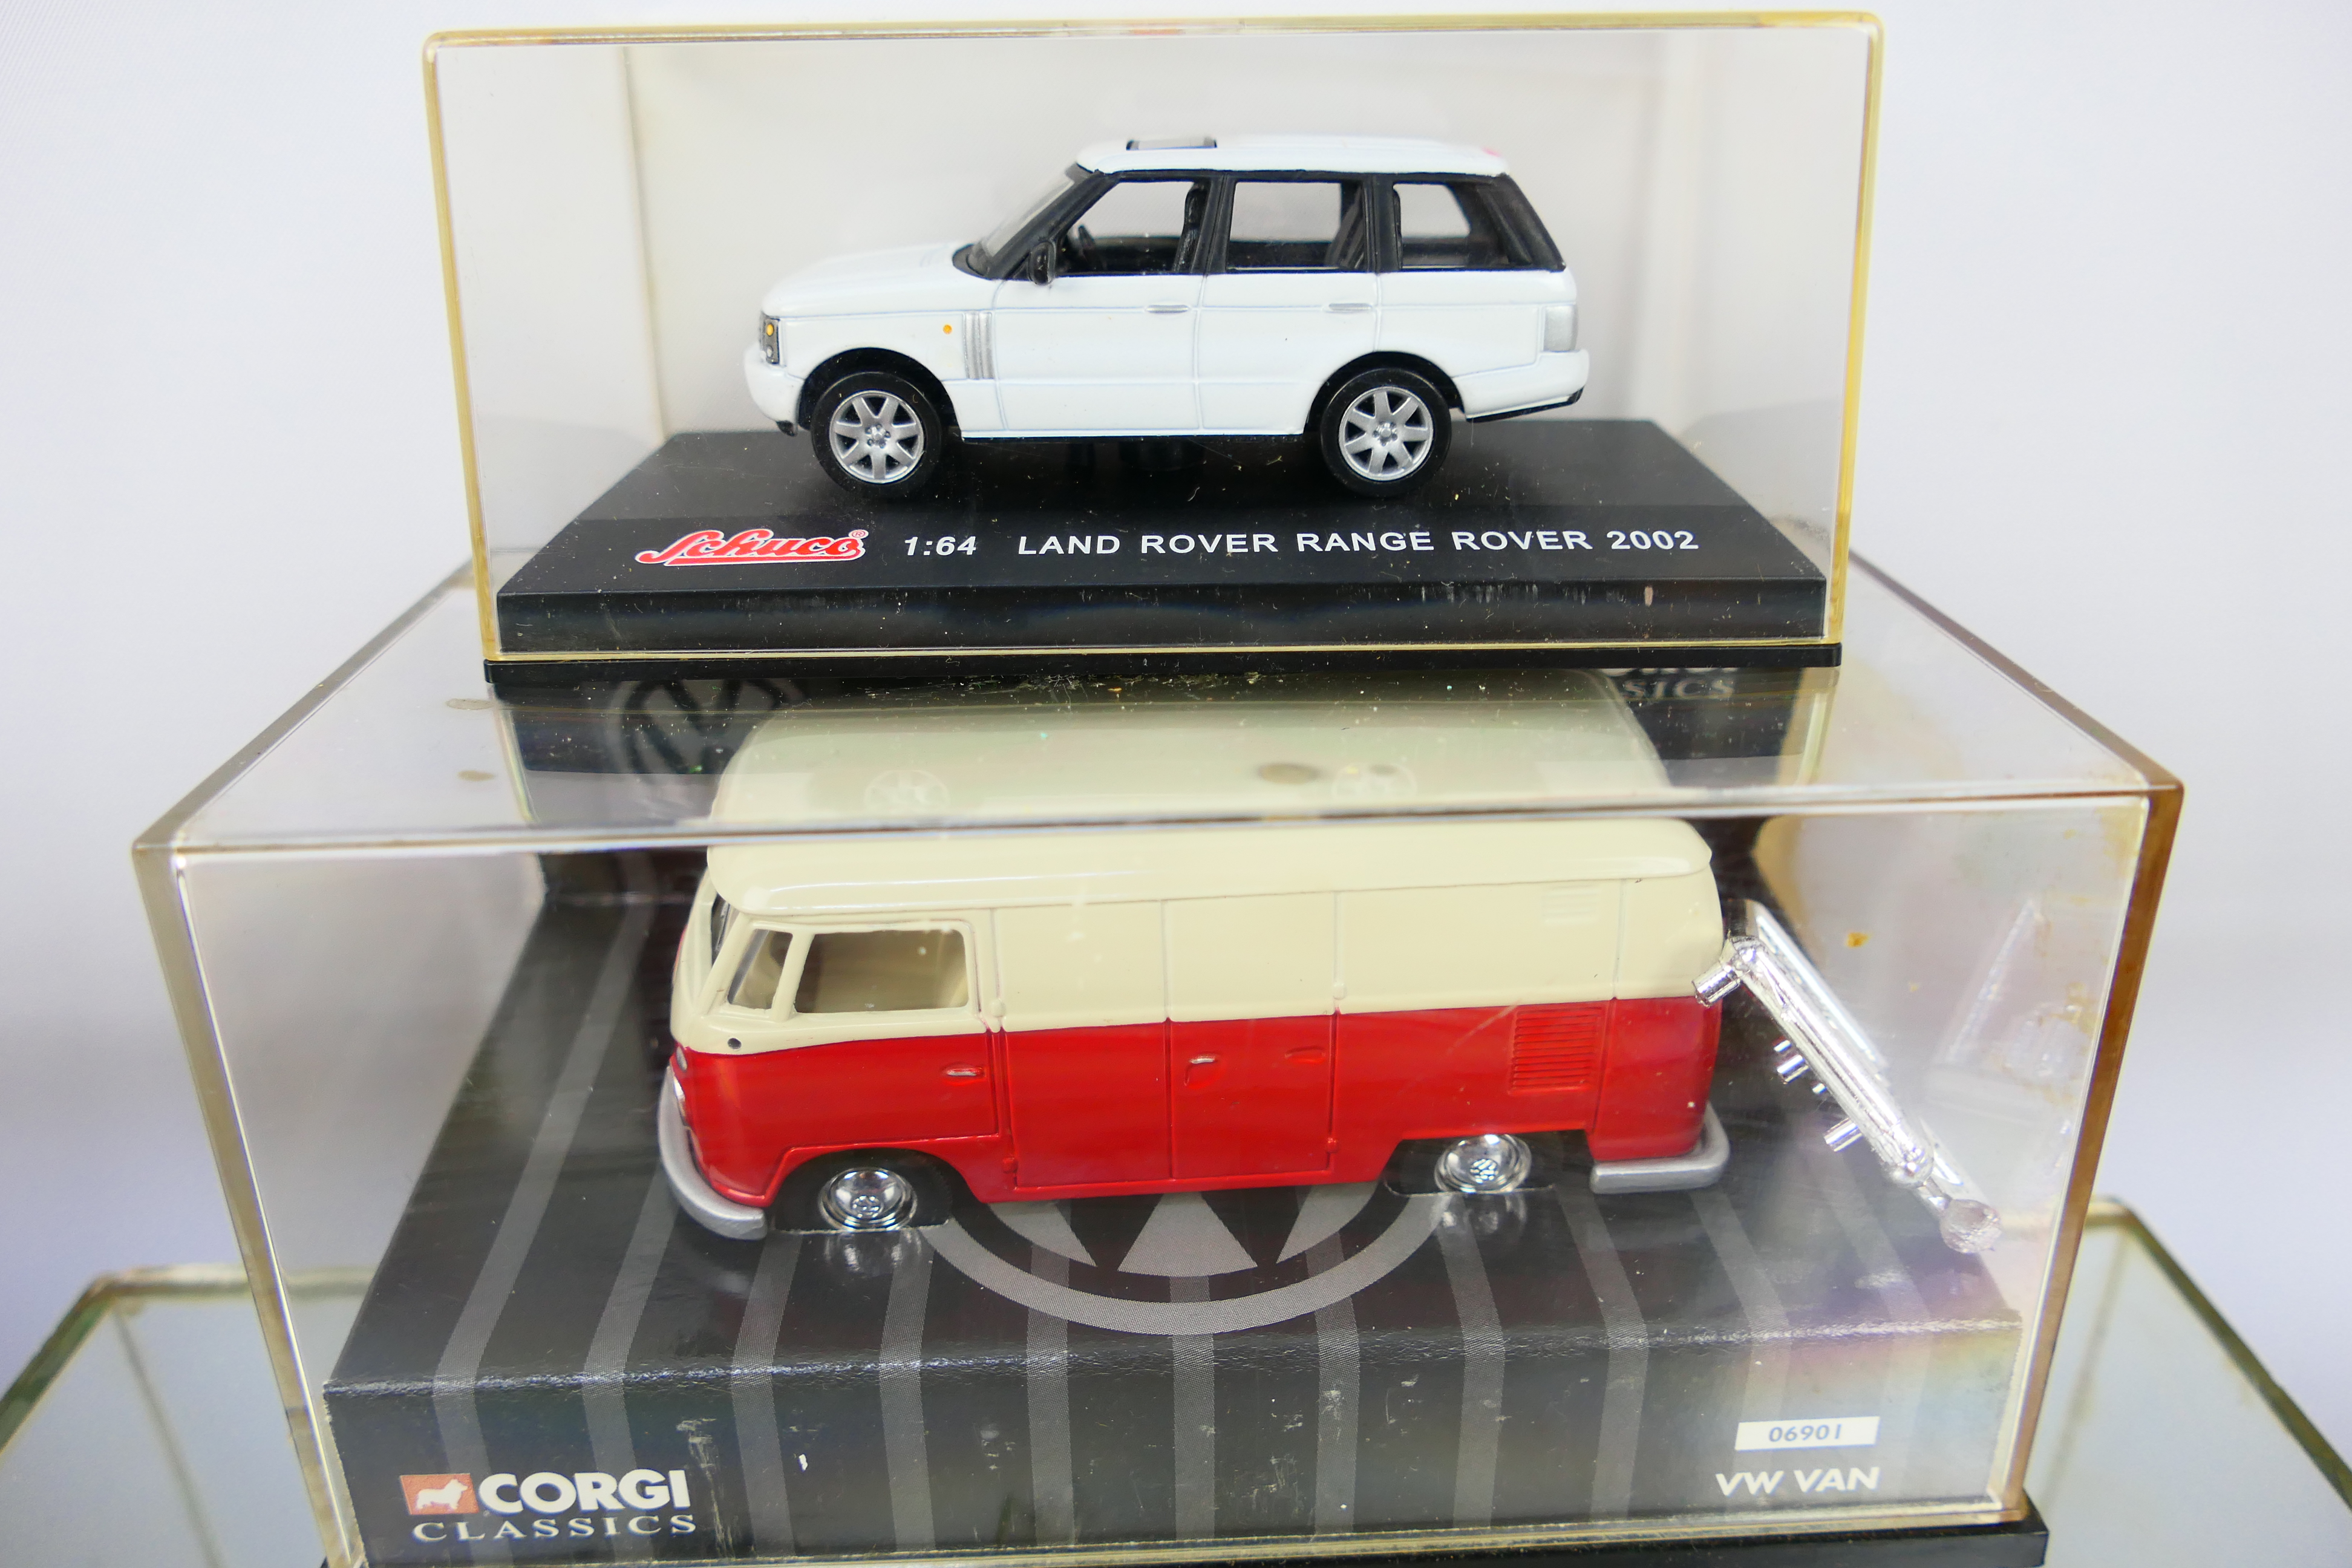 Corgi - Schuco - Burago - An assortment of 12 boxed cars from a number of different brands (8 Corgi, - Image 3 of 8